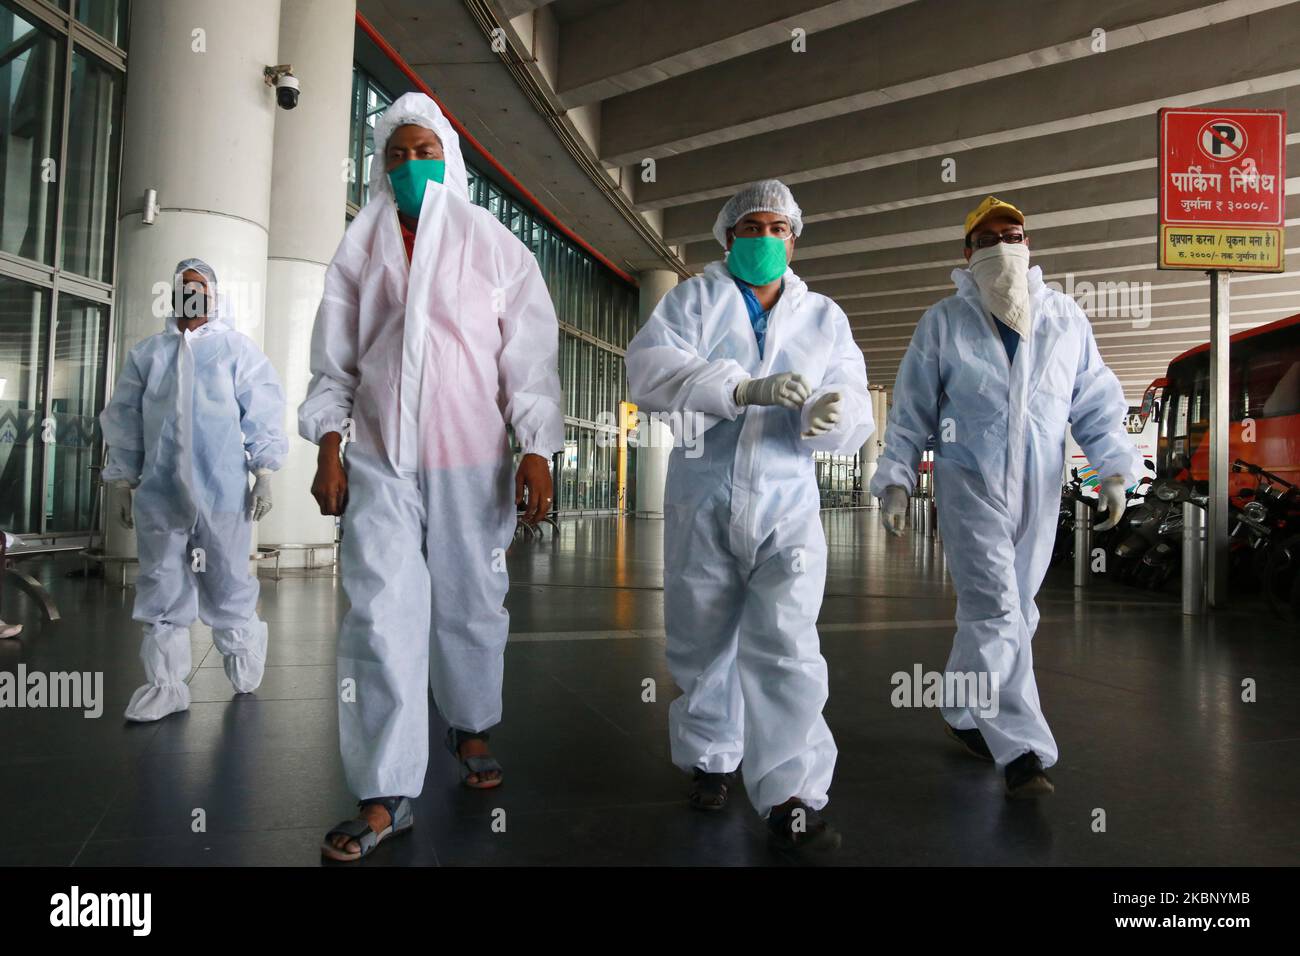 Health Worker wait to screen passenger traveling fro Bangladesh during a nationwide lockdown imposed as a preventive measure against the COVID-19 coronavirus on May 18,2020 in NSCBI Air Port in Kolkata,India.The first repatriation flight to West Bengal under the Vande Bharat Mission landed at the Kolkata airport on Monday from Bangladesh with 169 people, including 16 in need of medical emergency treatment and a pregnant woman,External Affairs Minister S Jaishankar welcomed the passengers and thanked the Ministry of Civil Aviation and the West Bengal government for working in coordination to fa Stock Photo